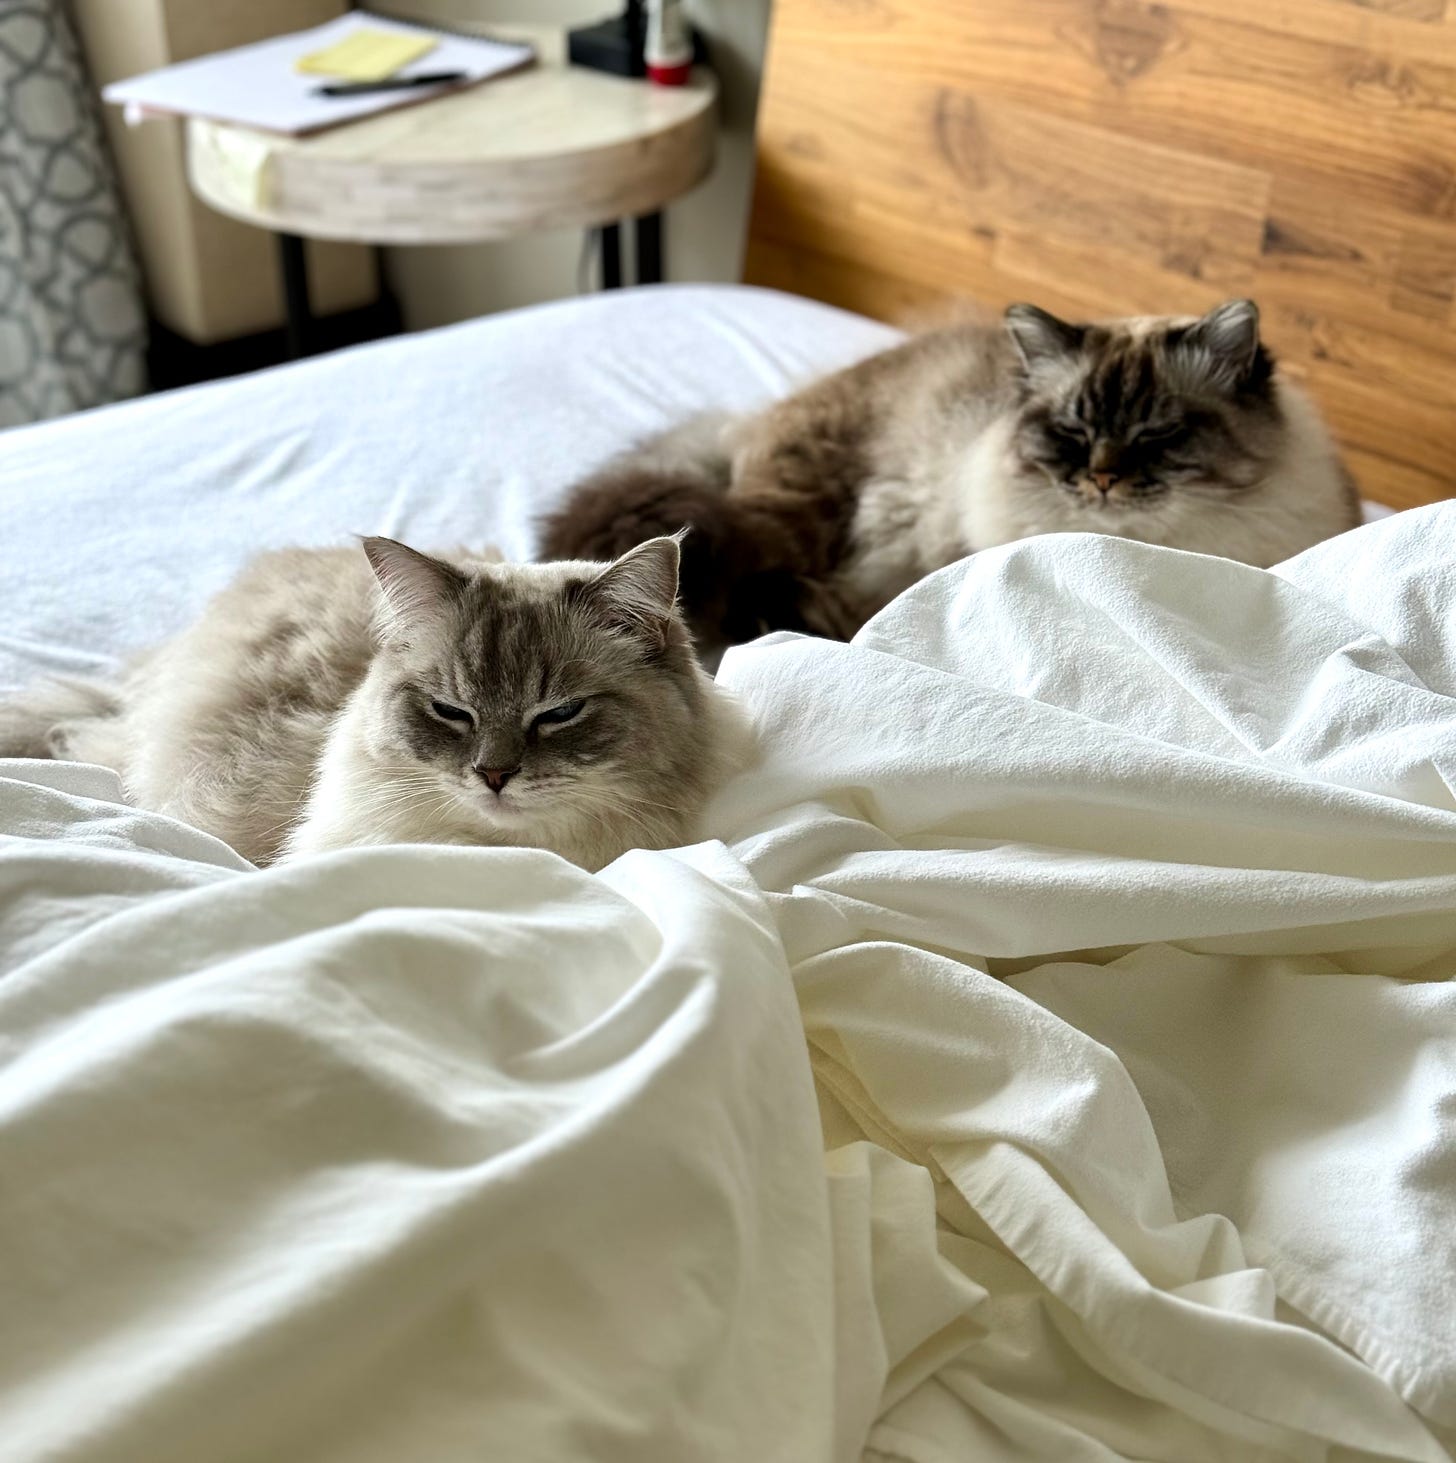 A white cat and a tortie point cat on a bed